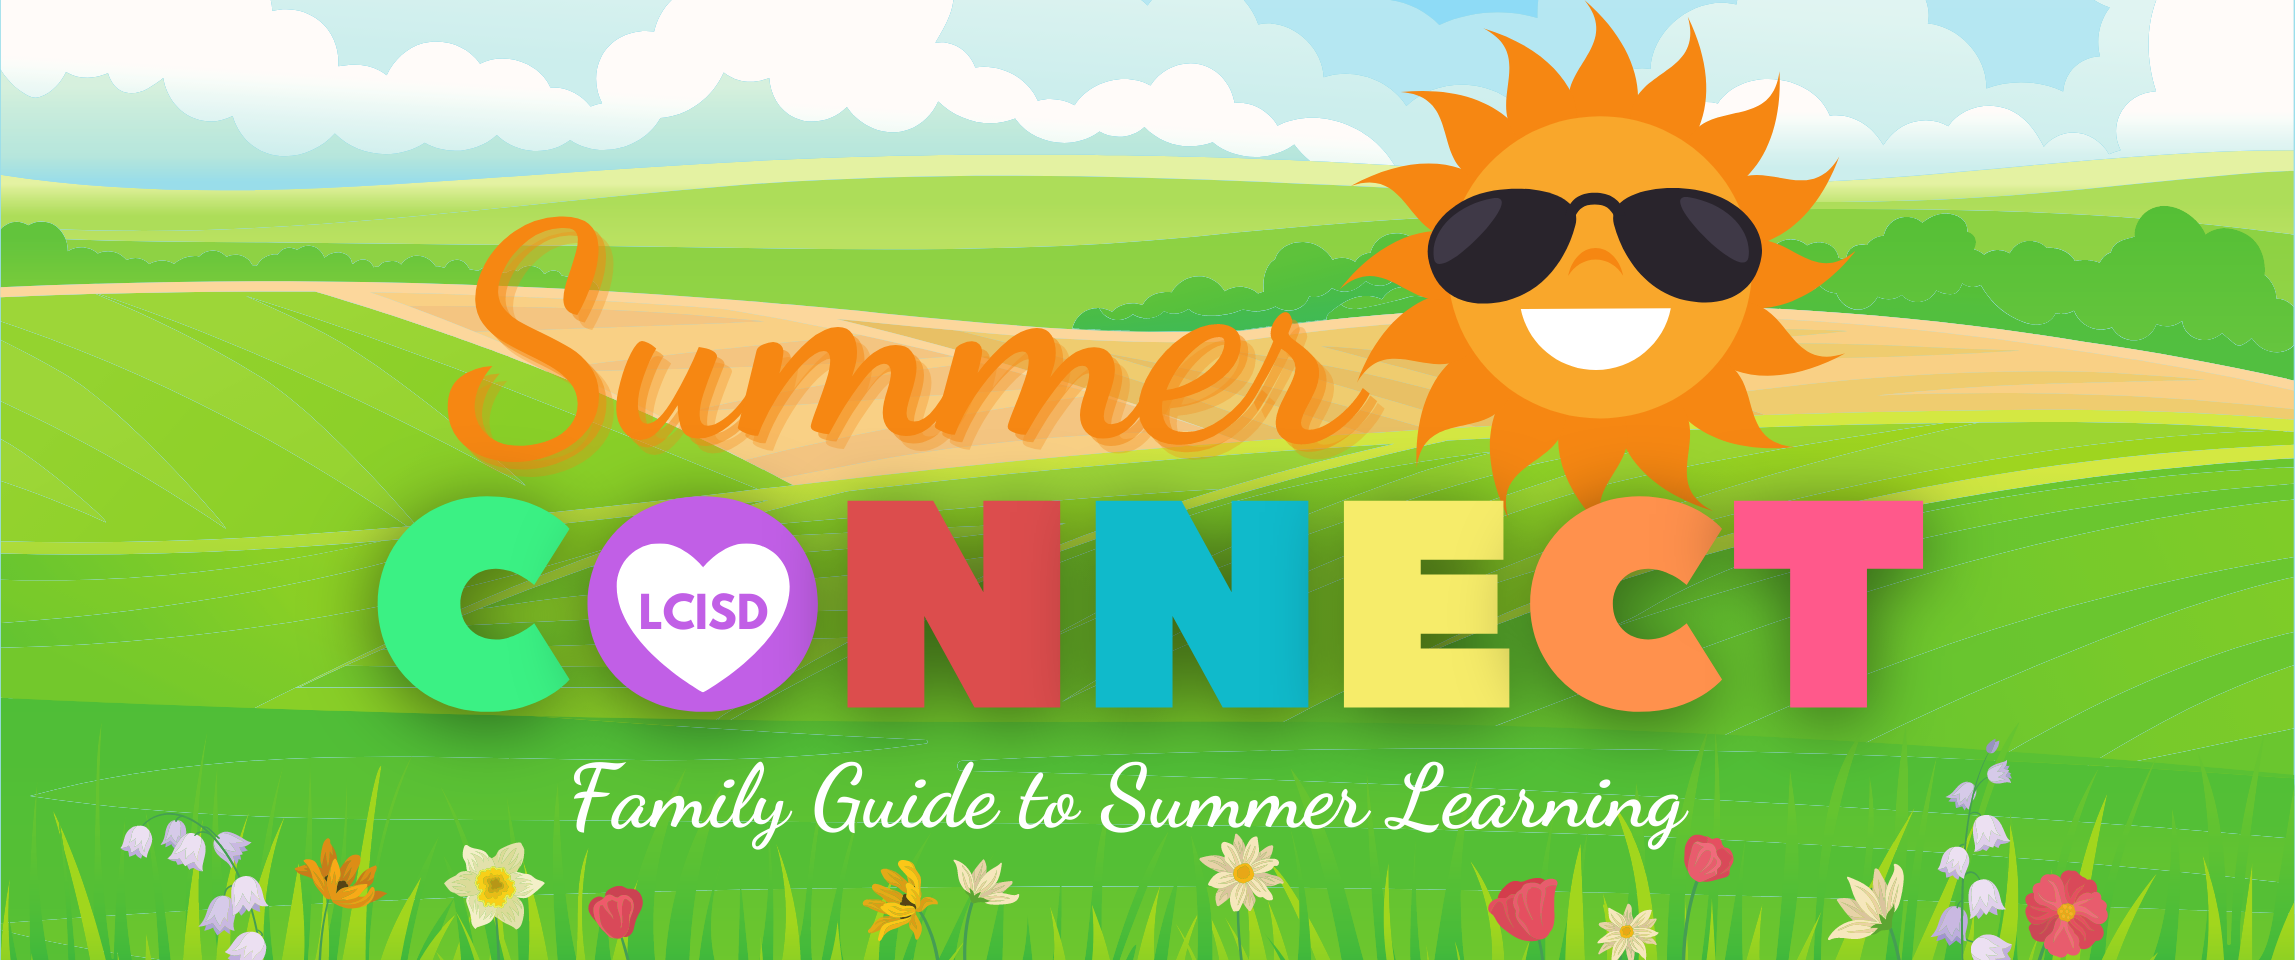 Family Guide to Summer Learning